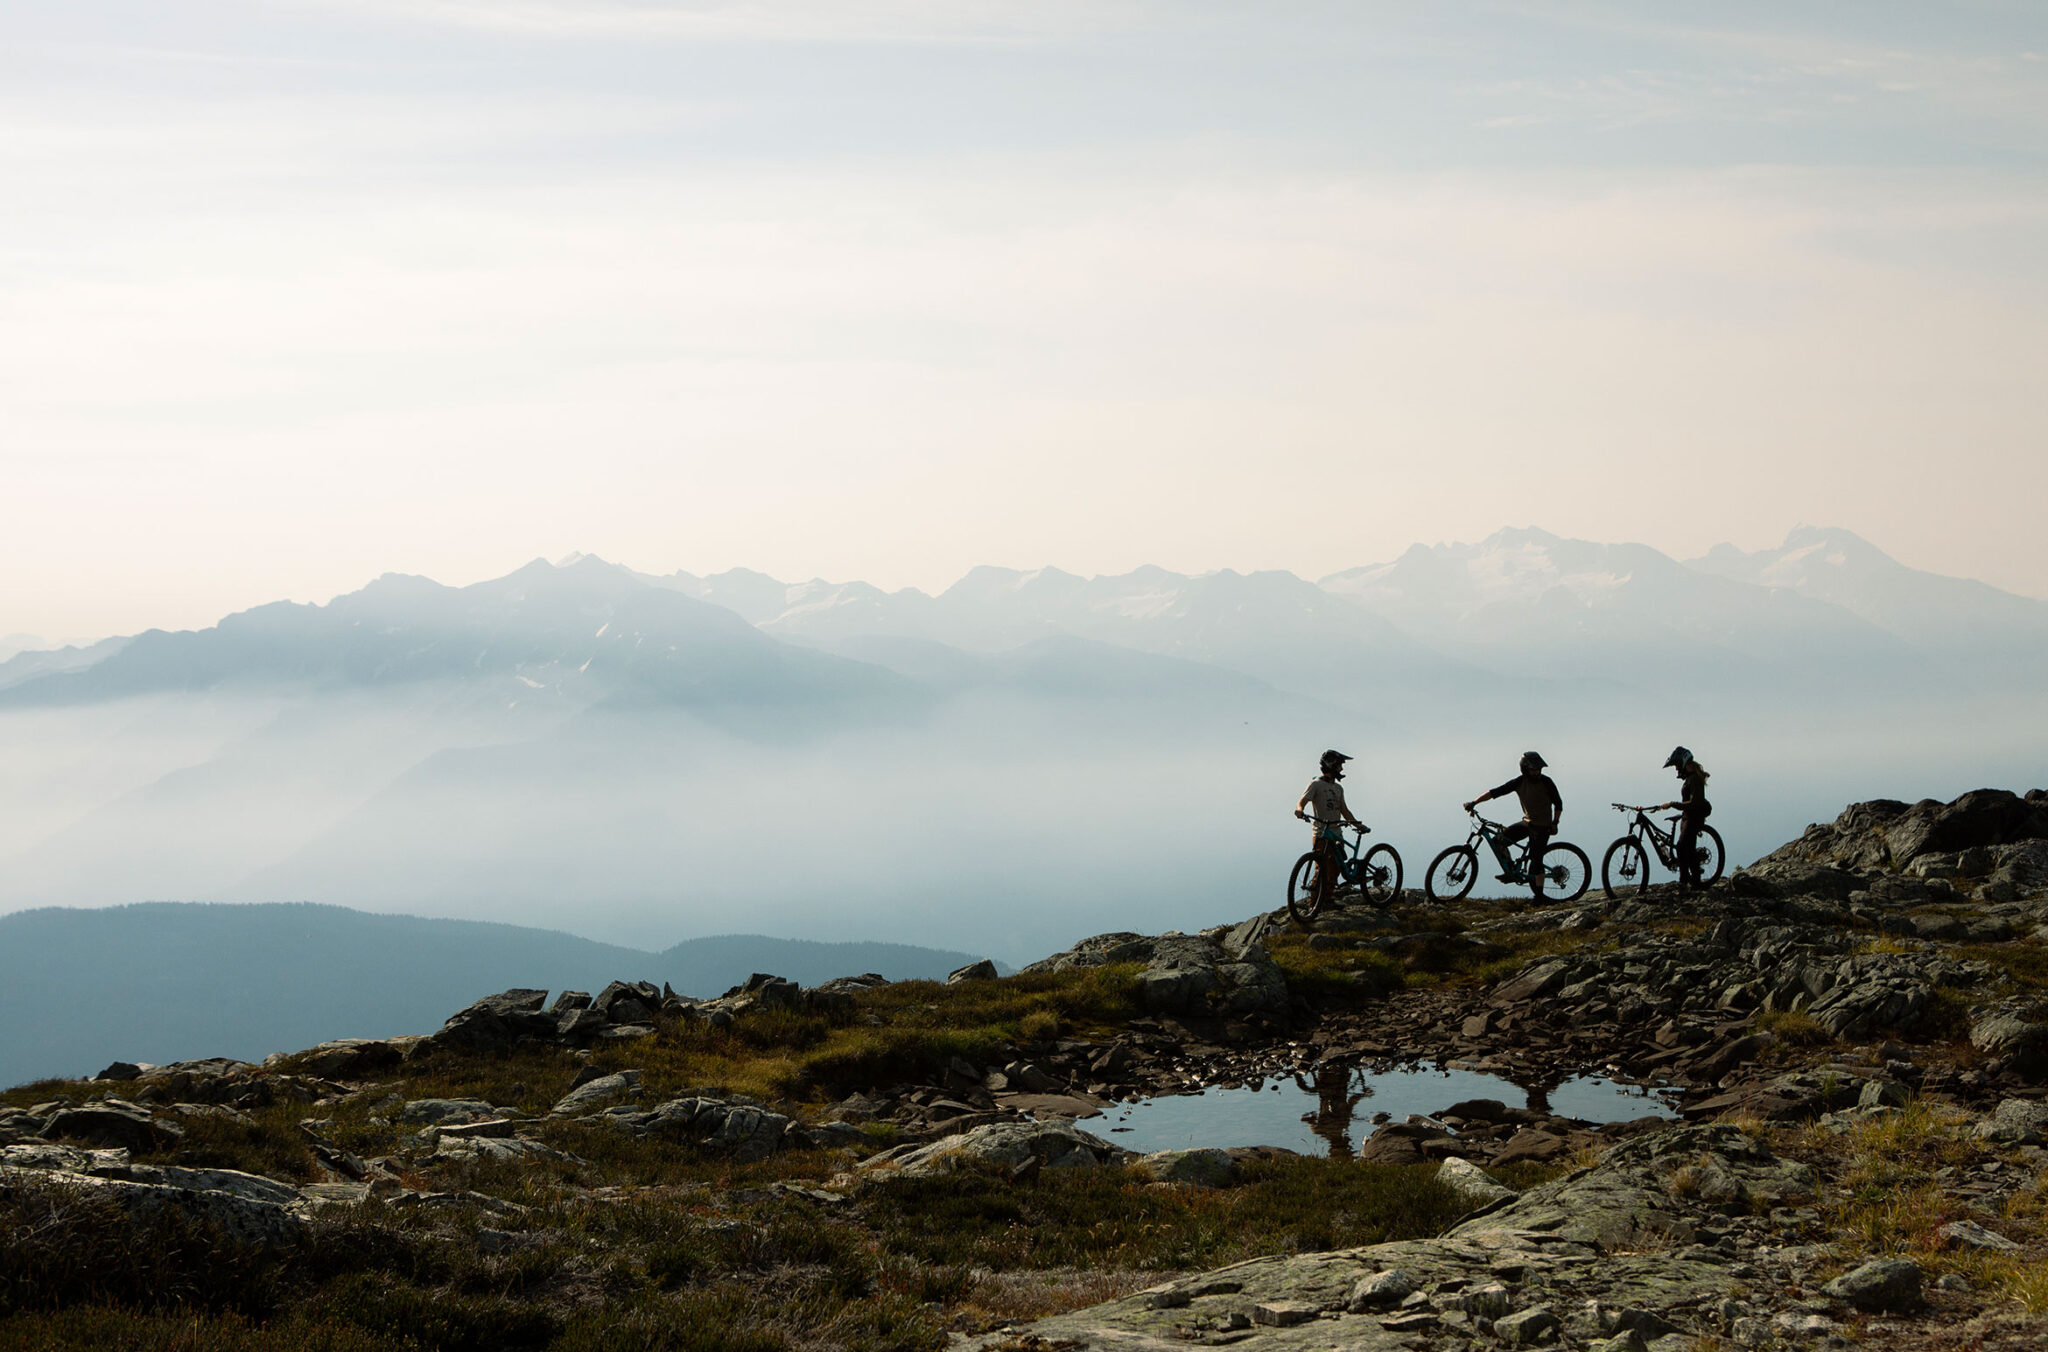 Three mountain bikers get ready to go in the high alpine with the Coast Mountains in the background.